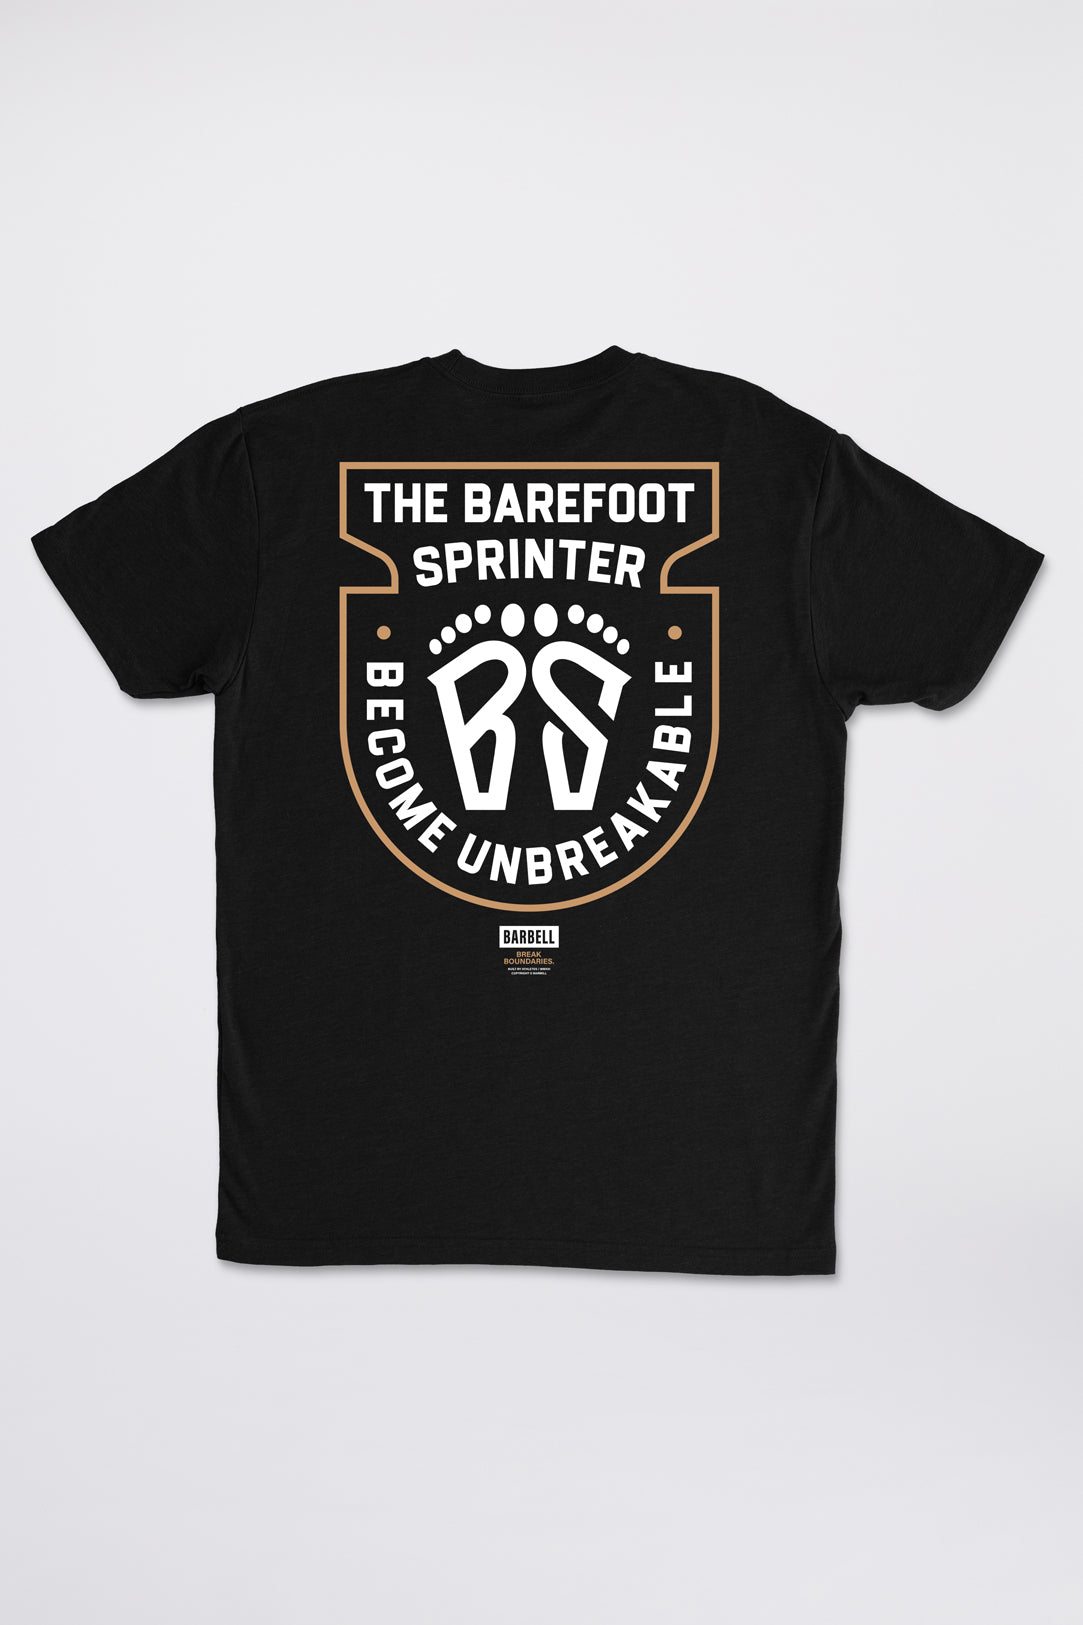 why we made the Barefoot Sprinter Trademark Tee